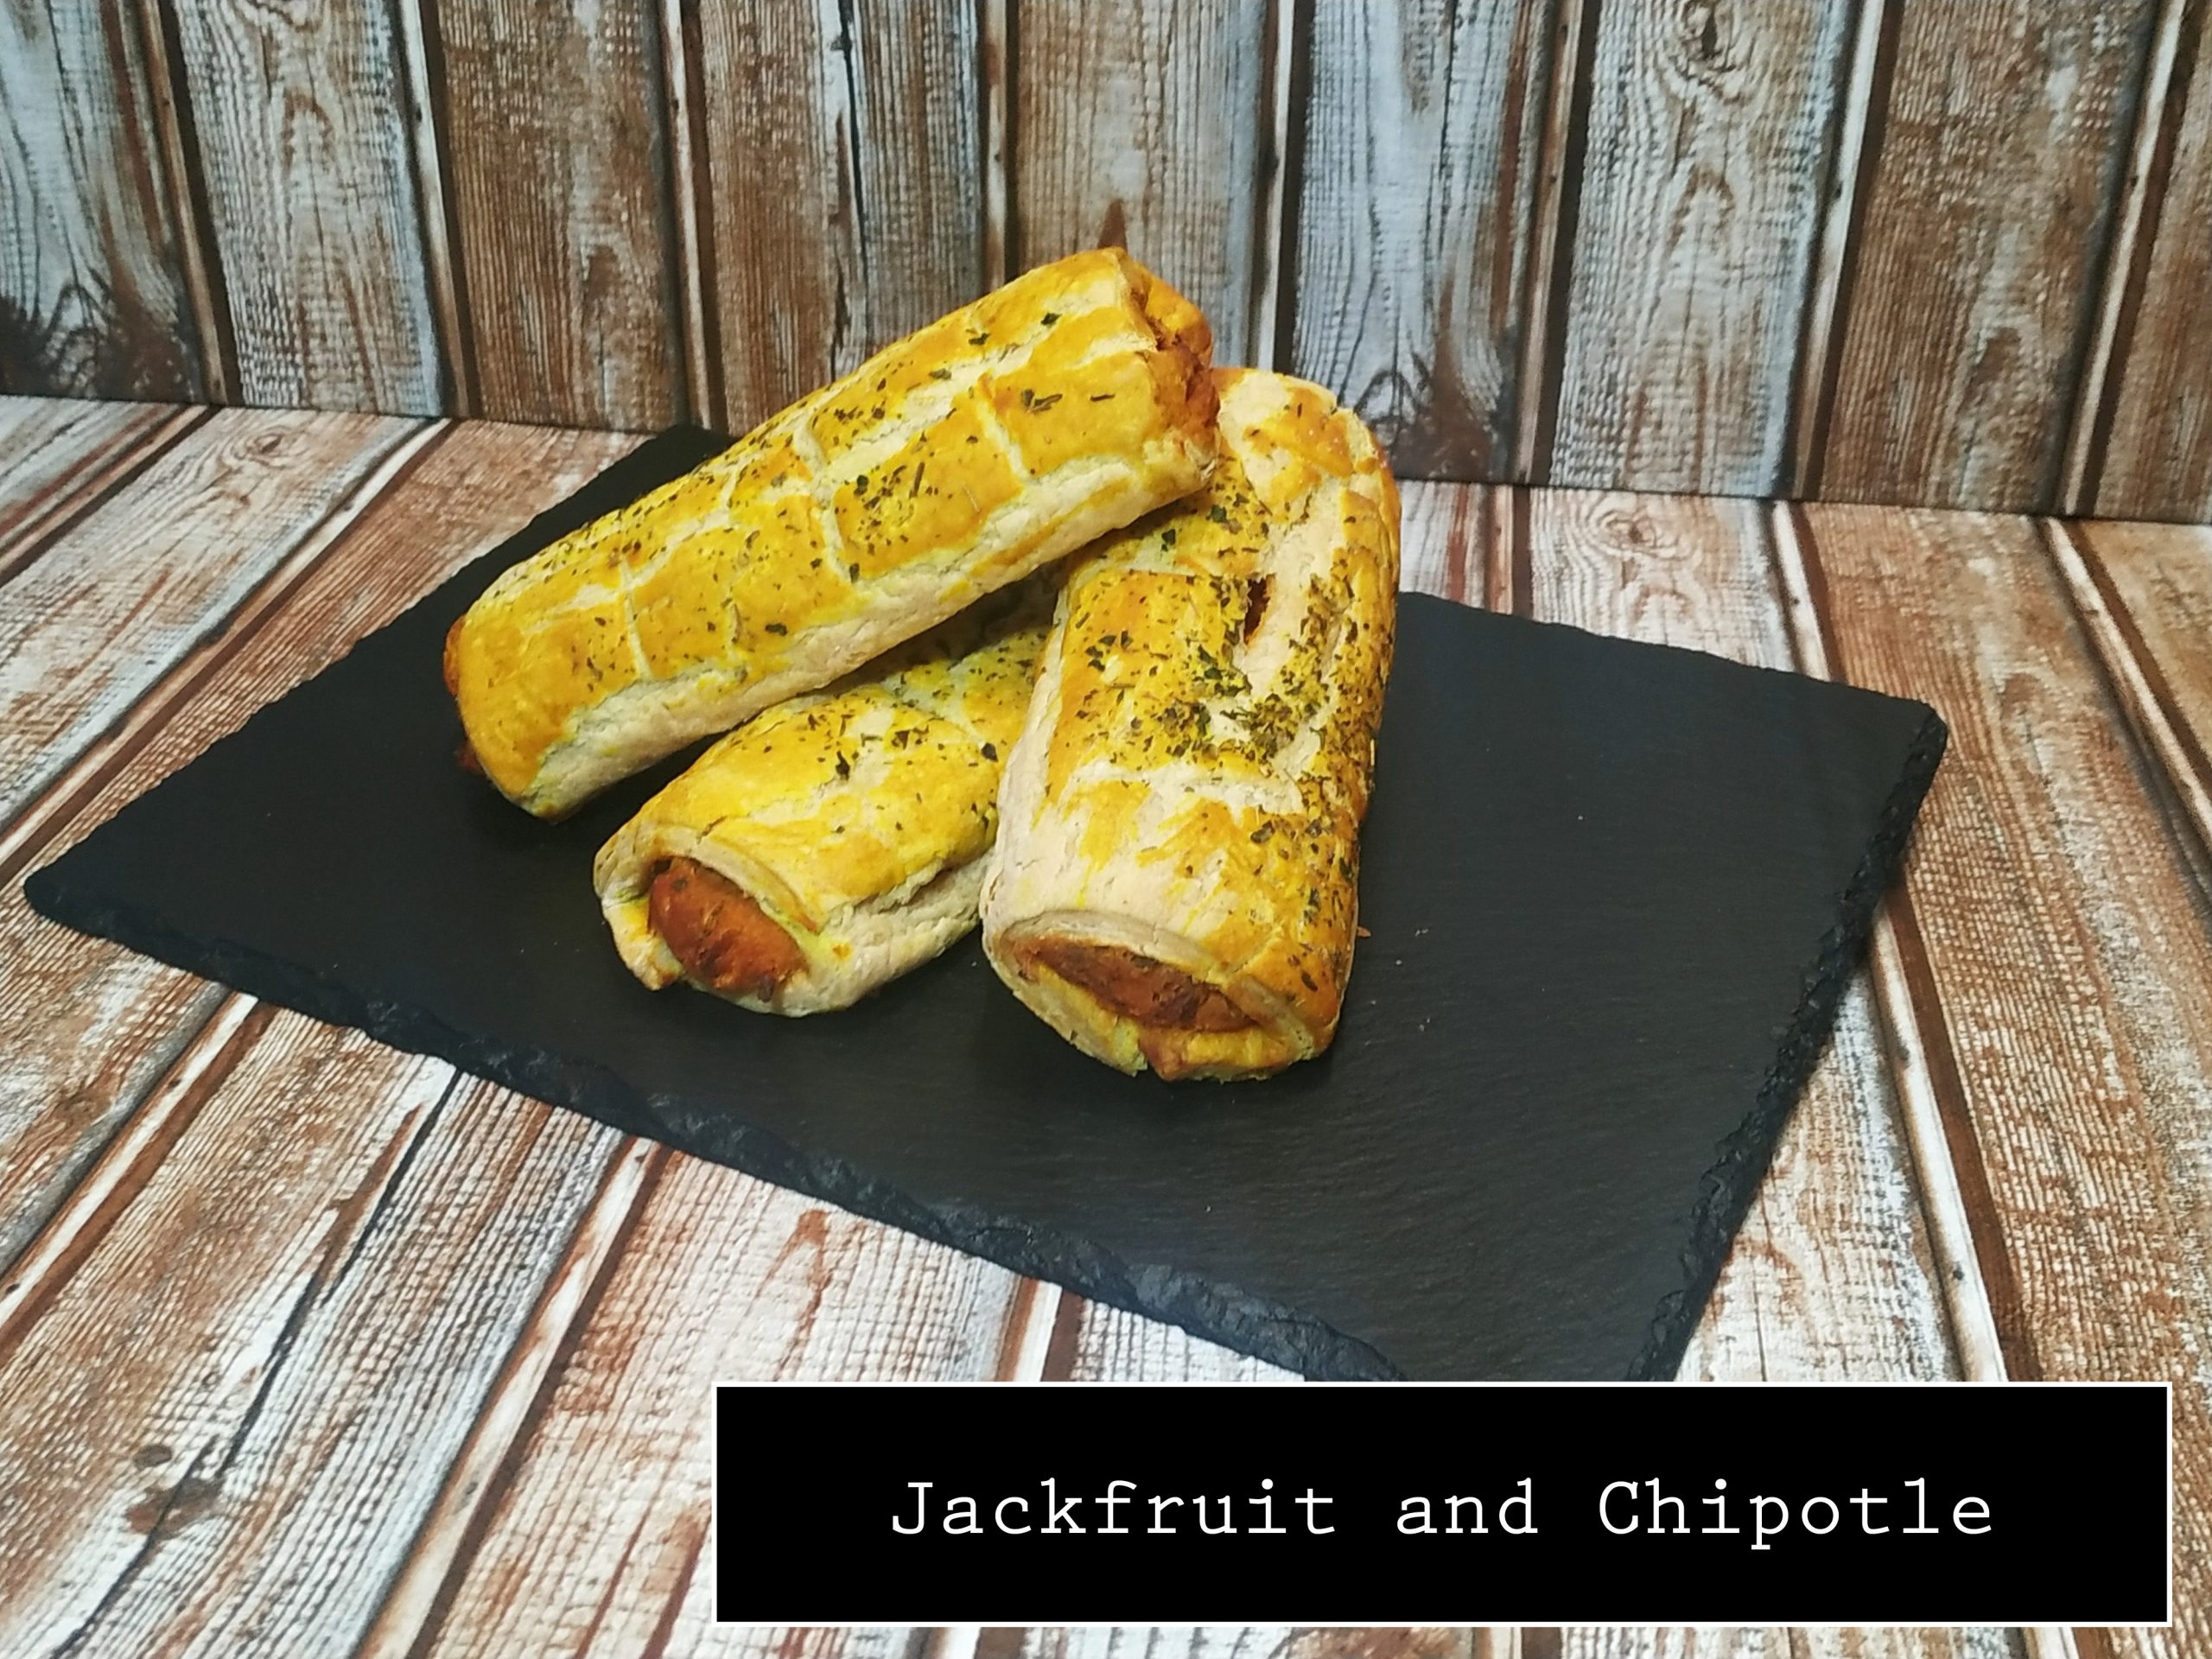 Jackfruit & Chipotle by Sandwich in the Square